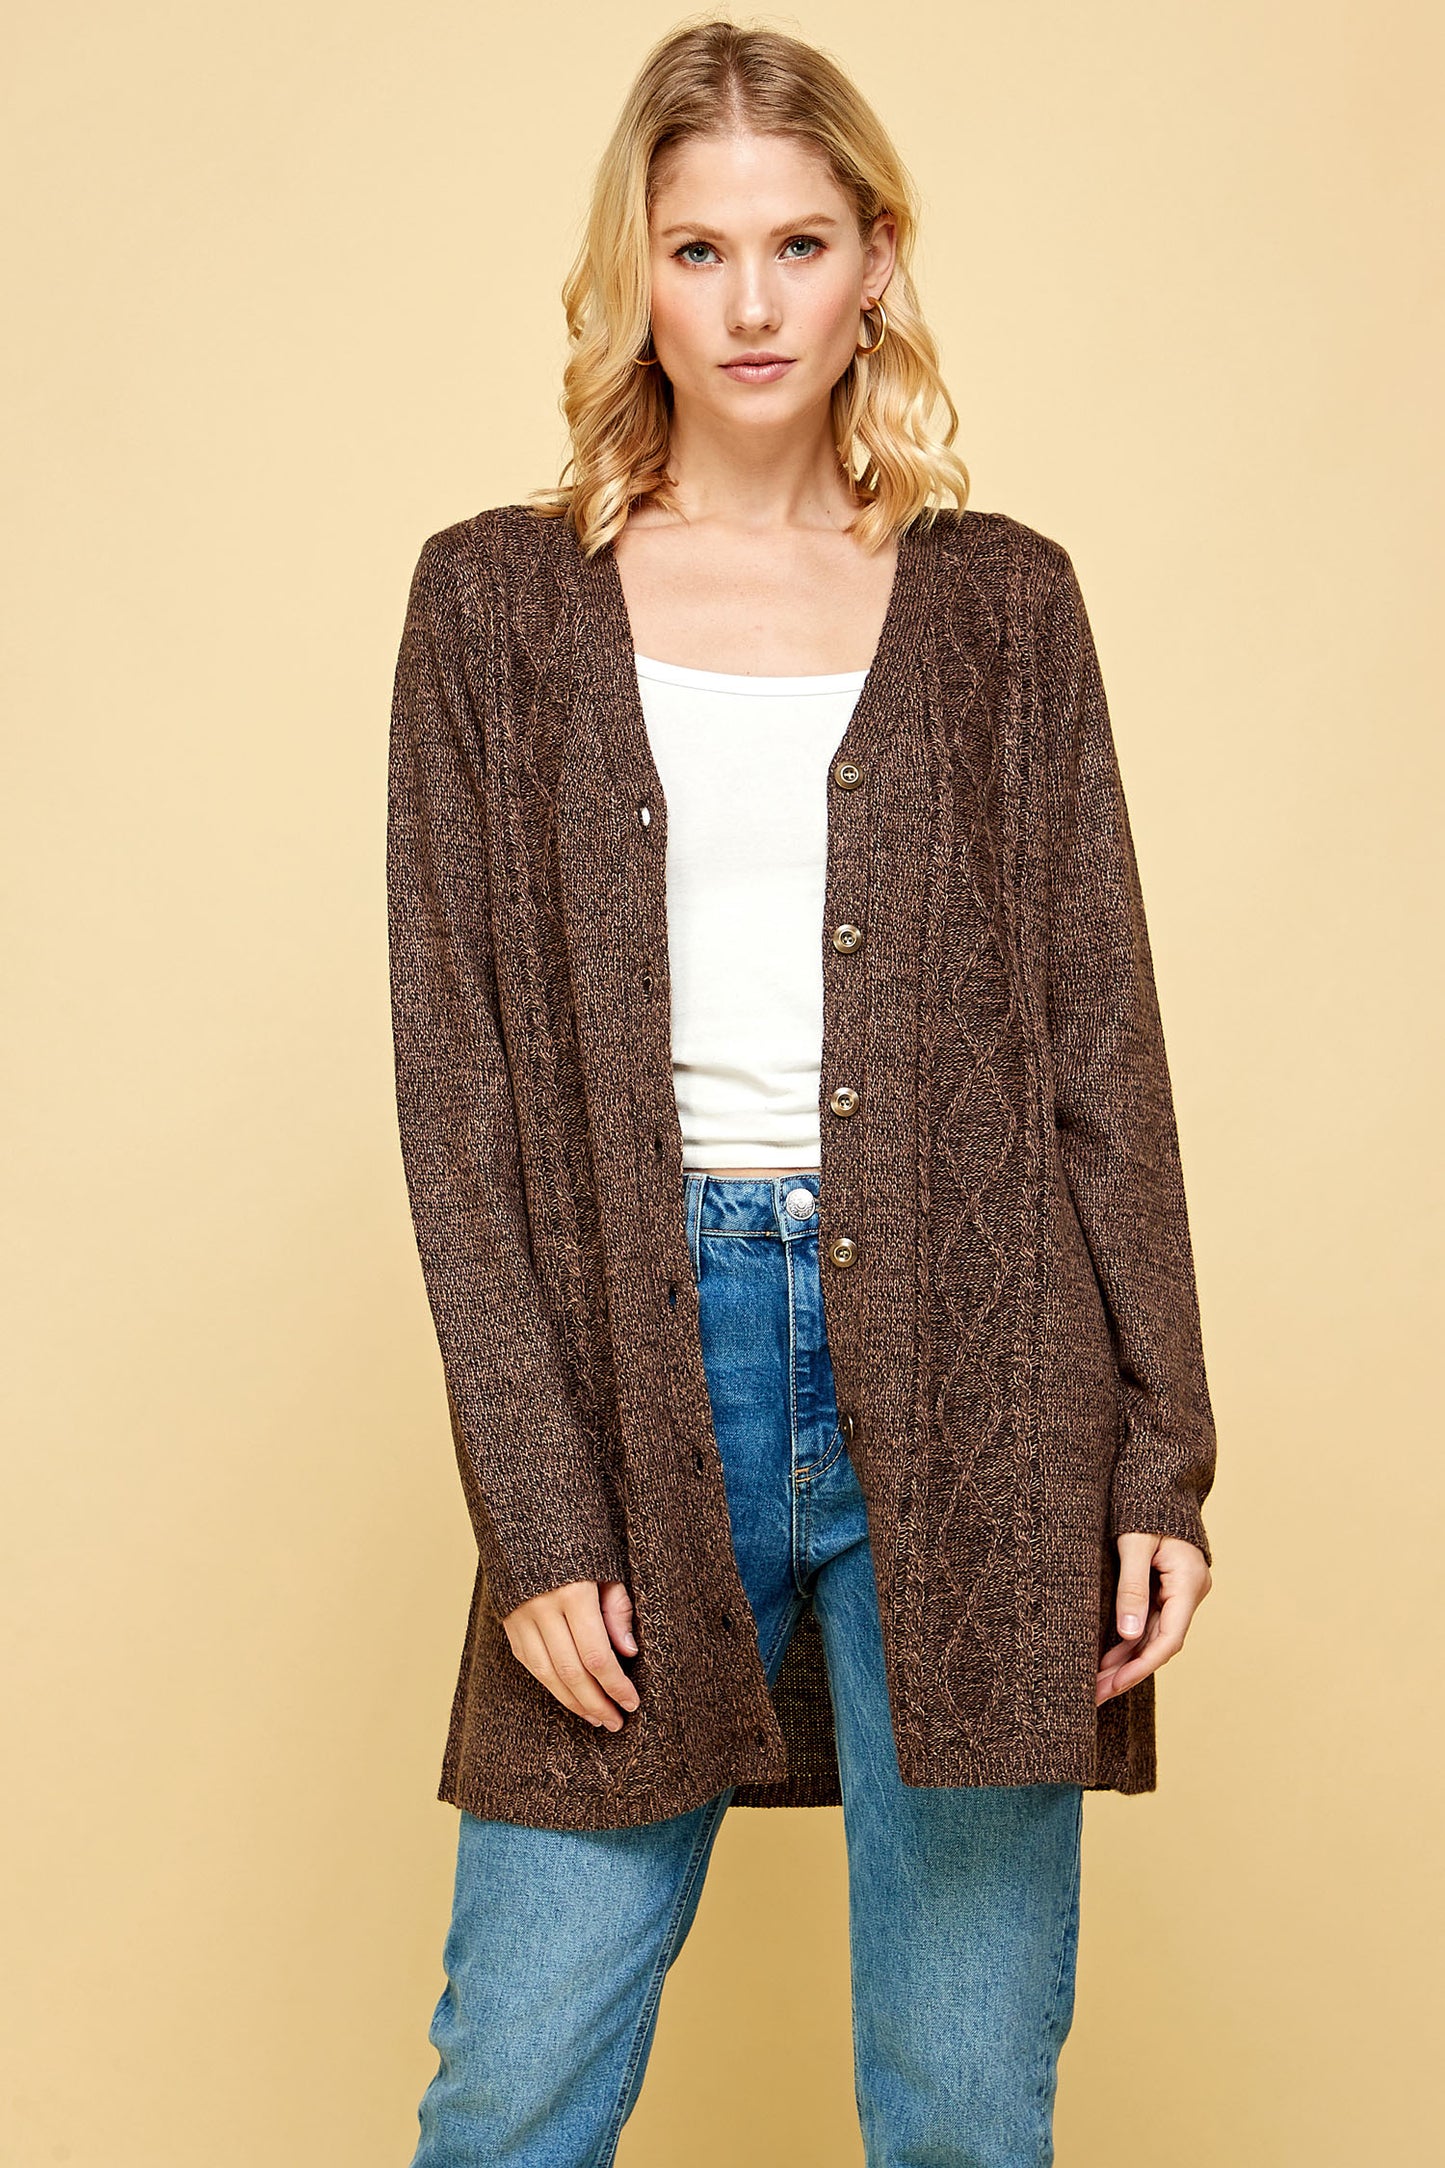 BUTTON FRONT V-NECK KNIT CARDIGAN IN BROWN